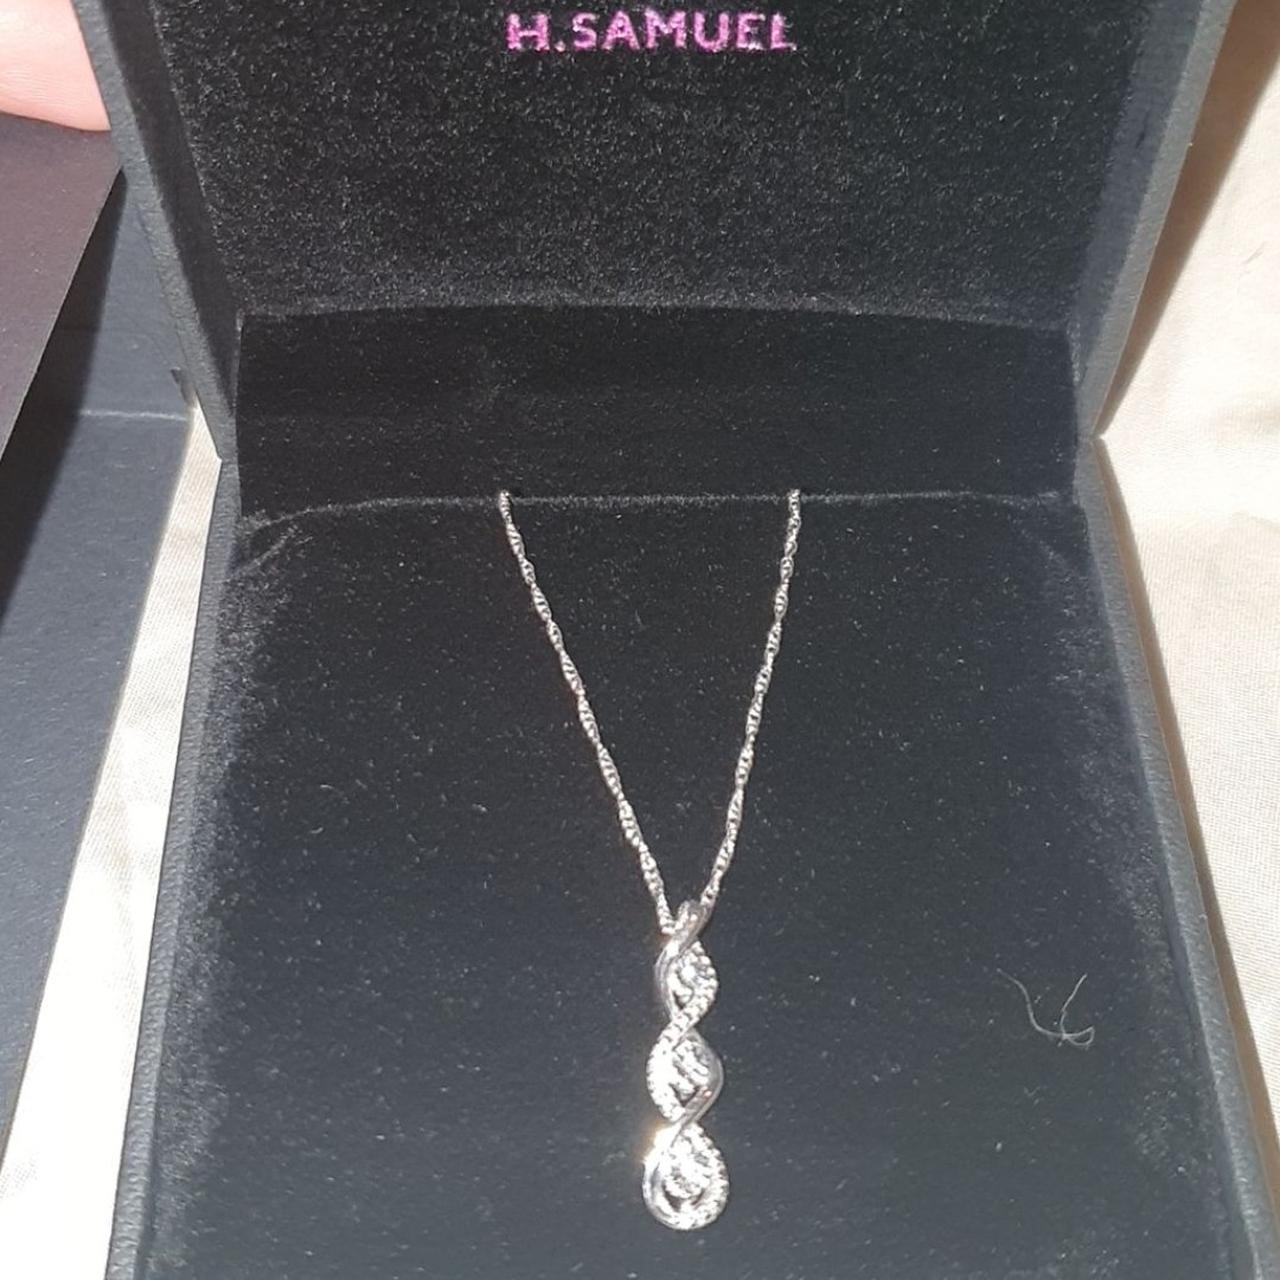 Diamond necklace | in Sheffield, South Yorkshire | Gumtree